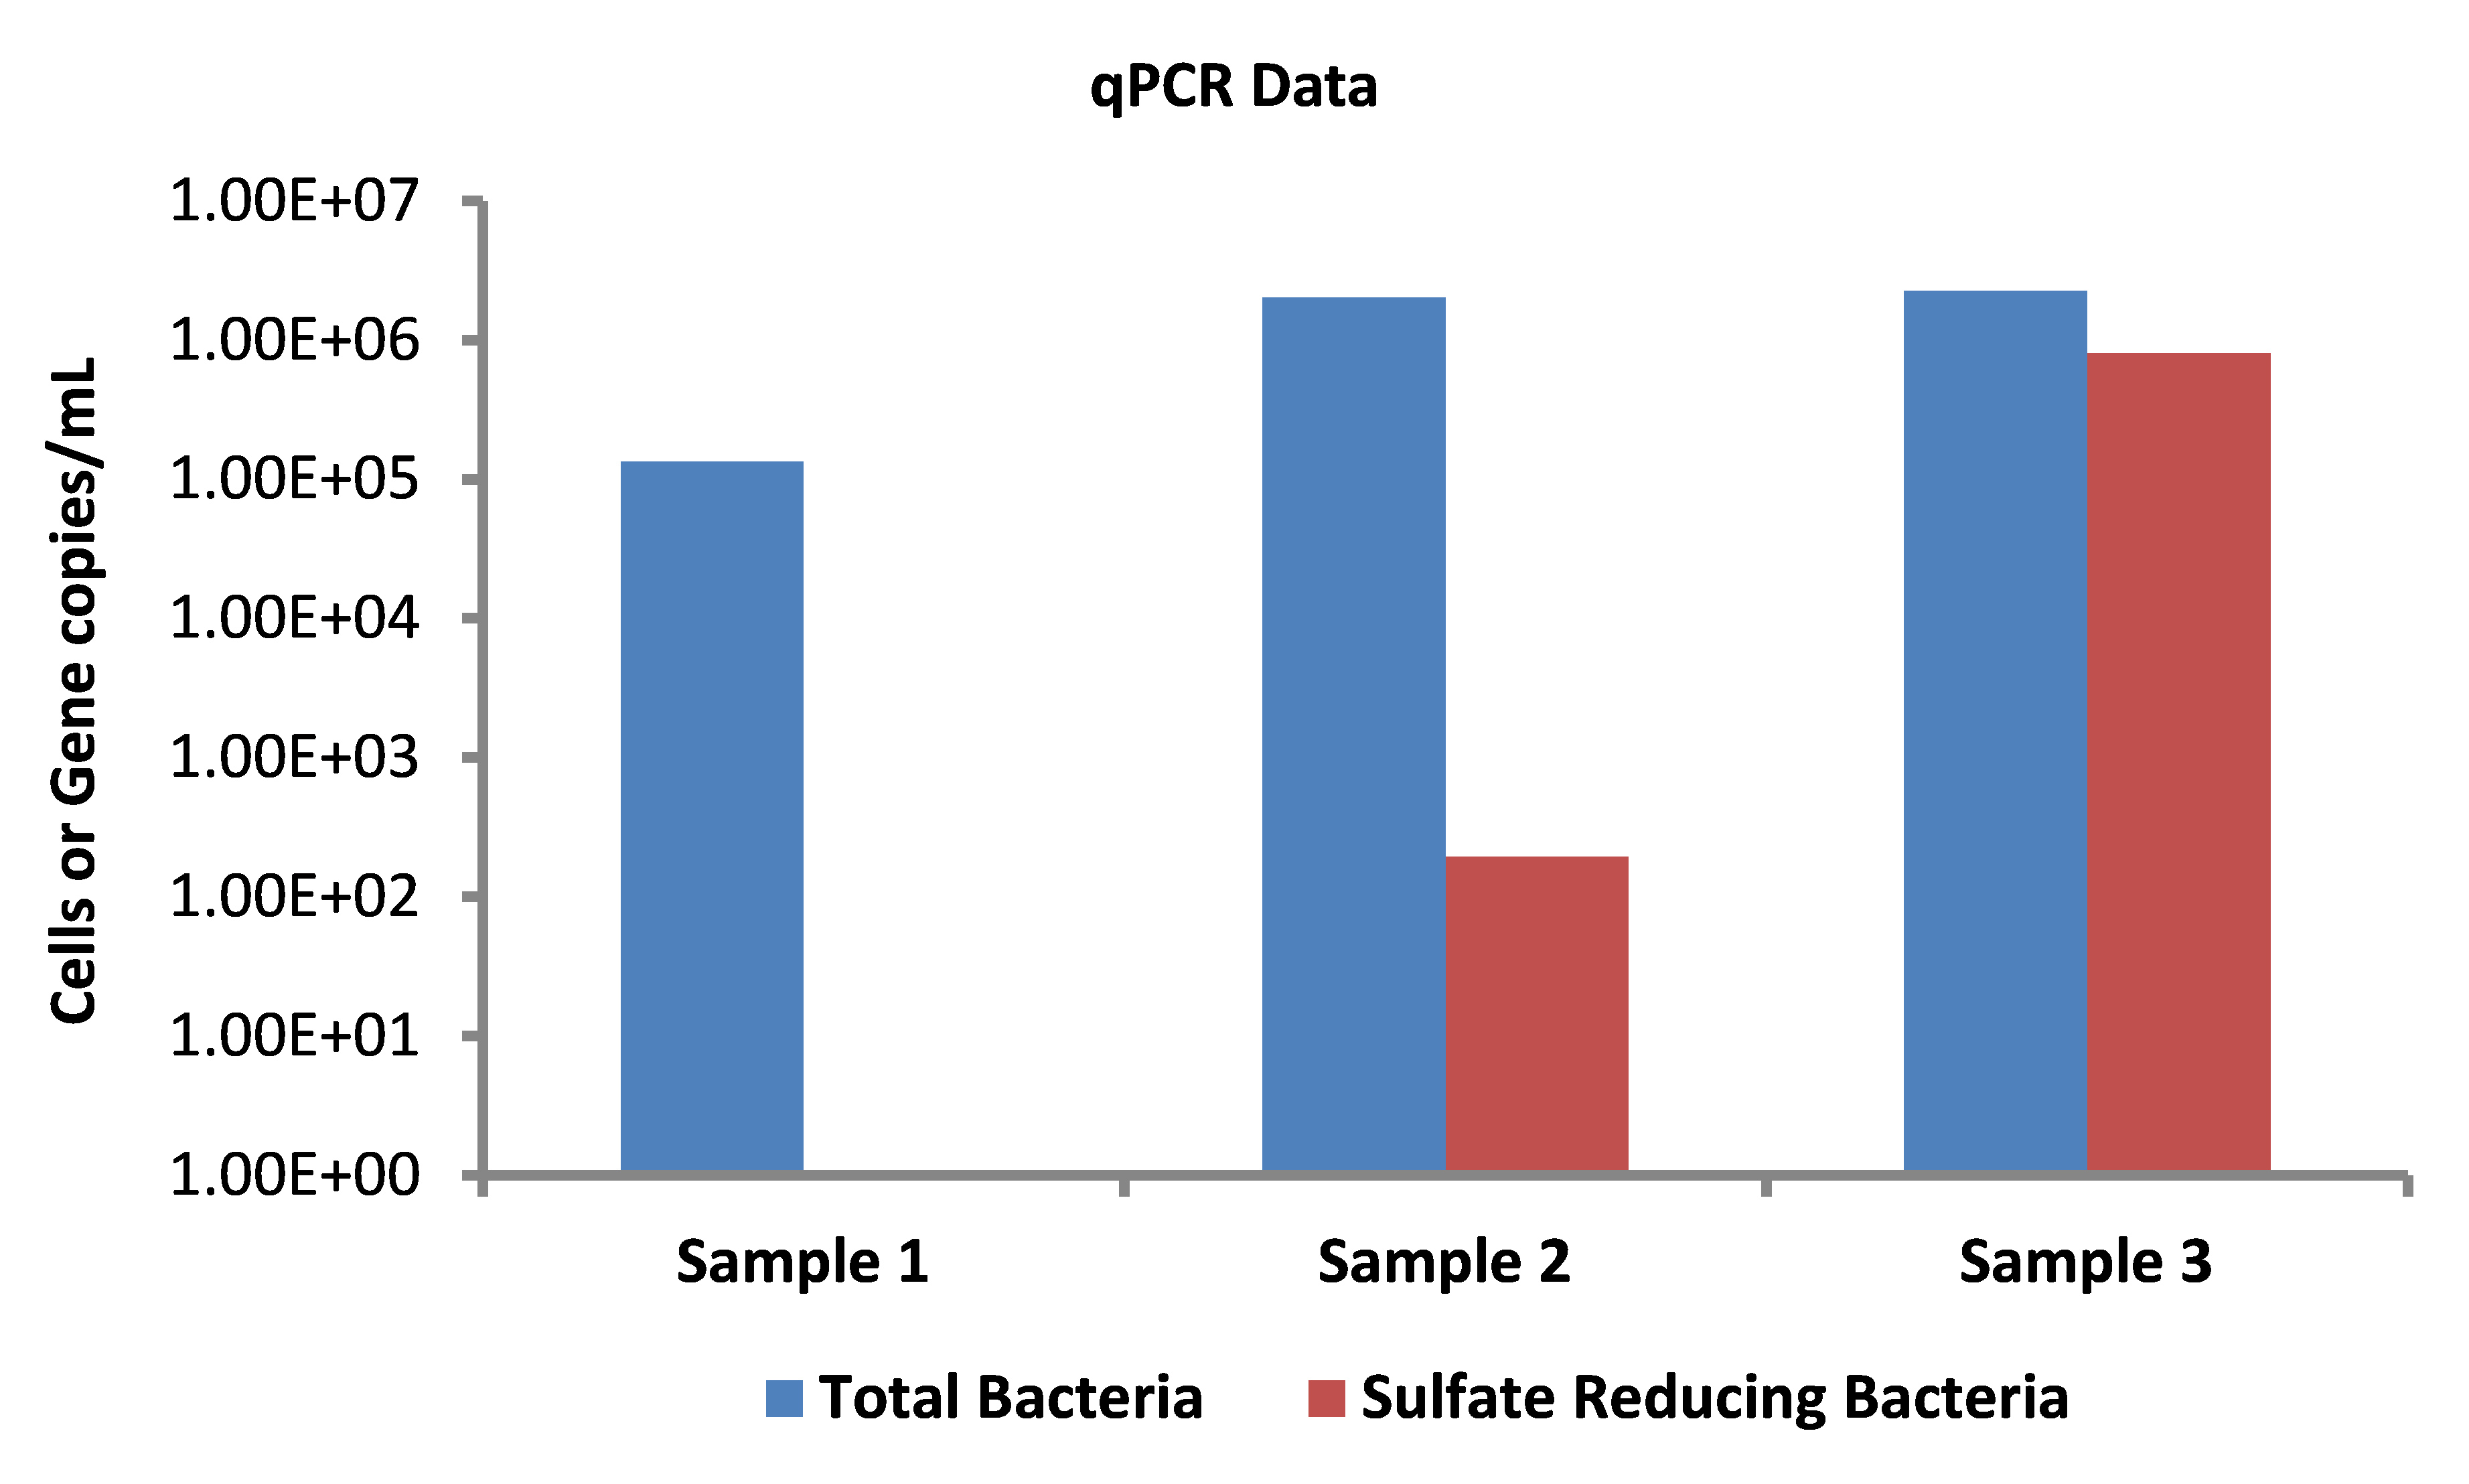 The graph depicts data collected from a qPCR analysis. Image courtesy of Microbial Insights.